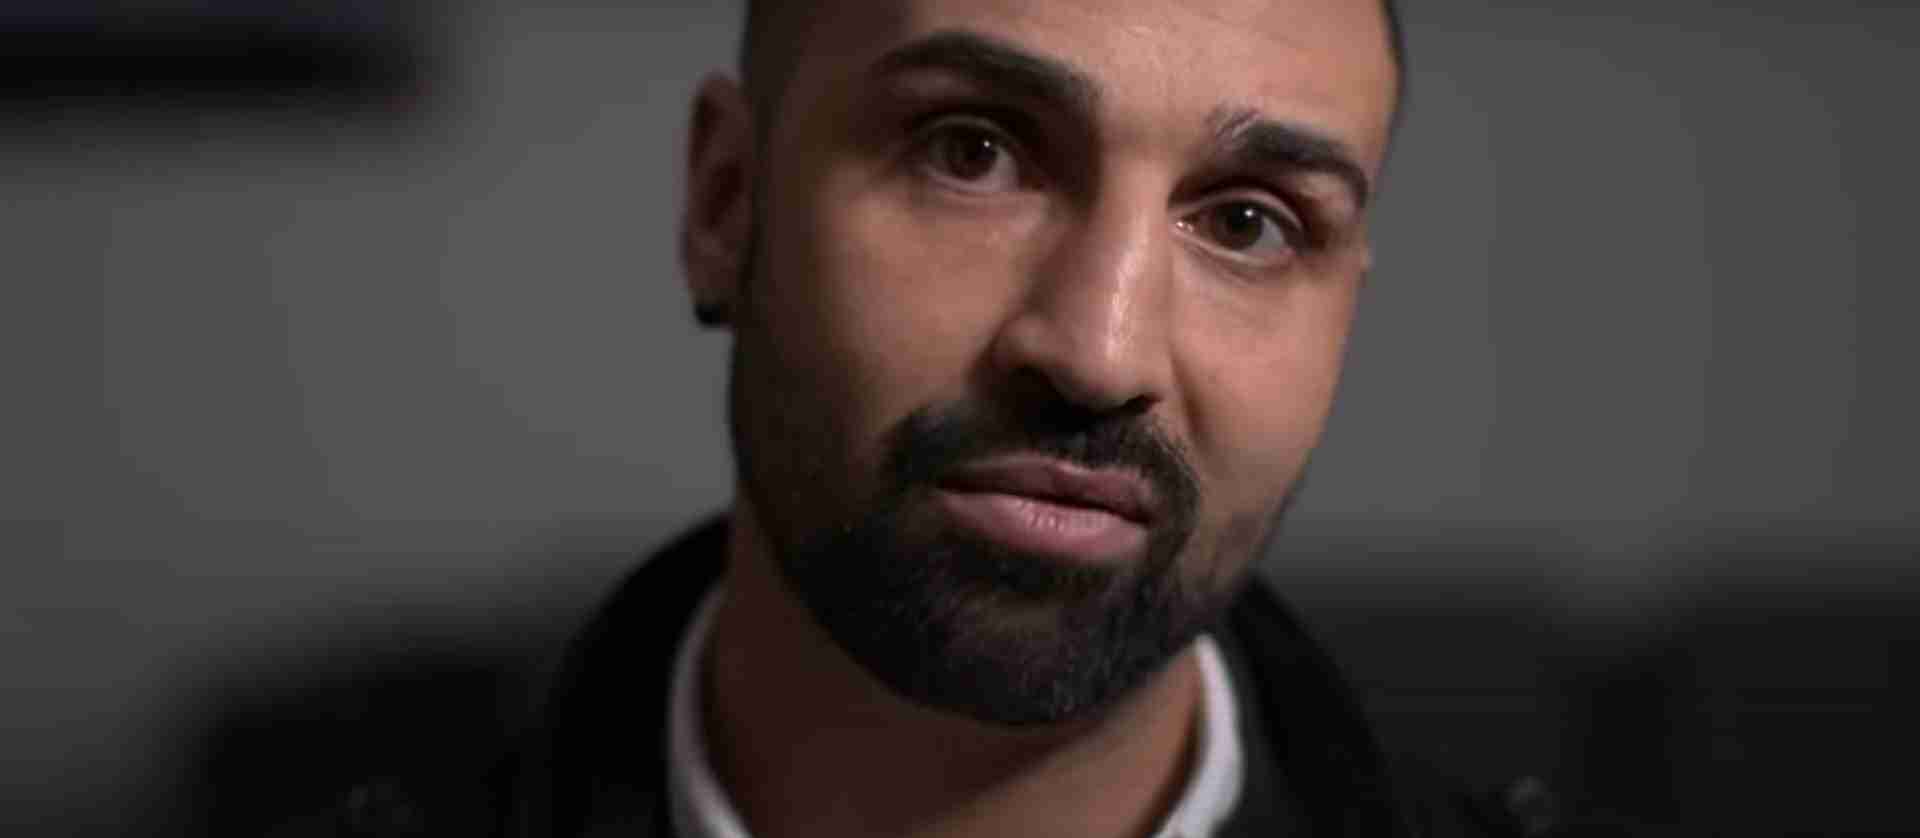 Paulie Malignaggi On Who Is The Next Face of Boxing